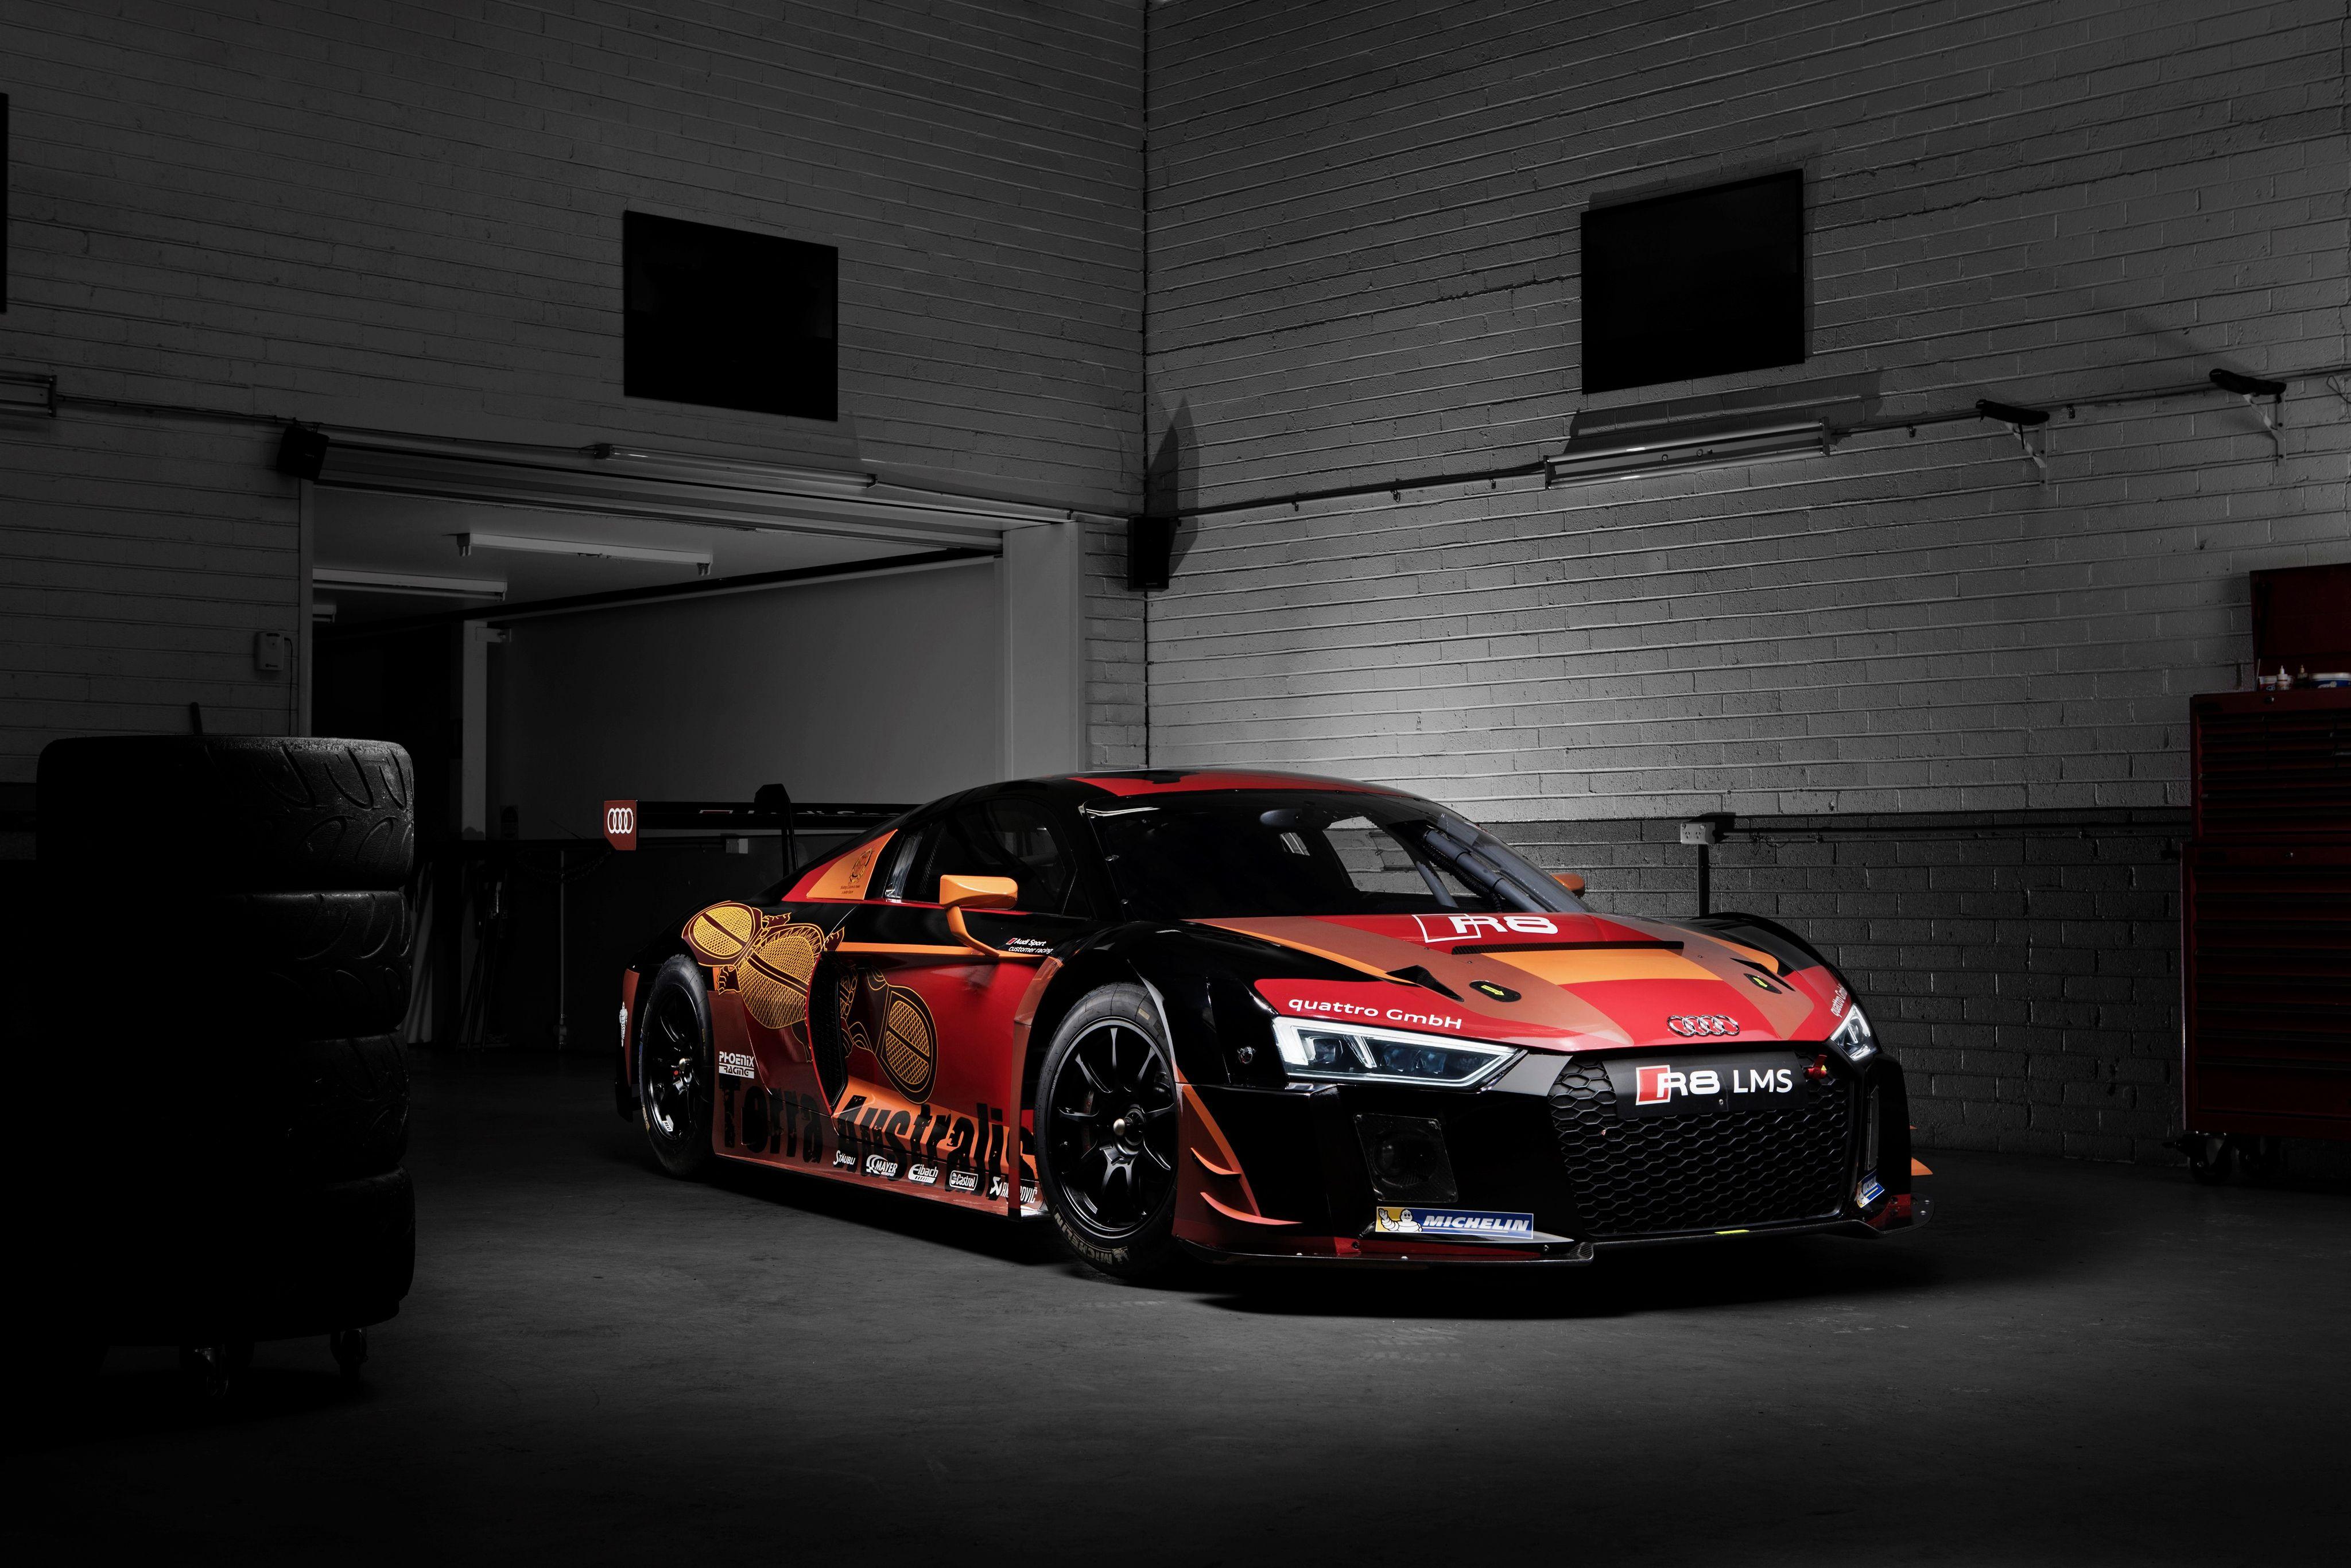 677 Awesome Audi r8 race car prototype wallpaper for Wall poster in bedroom